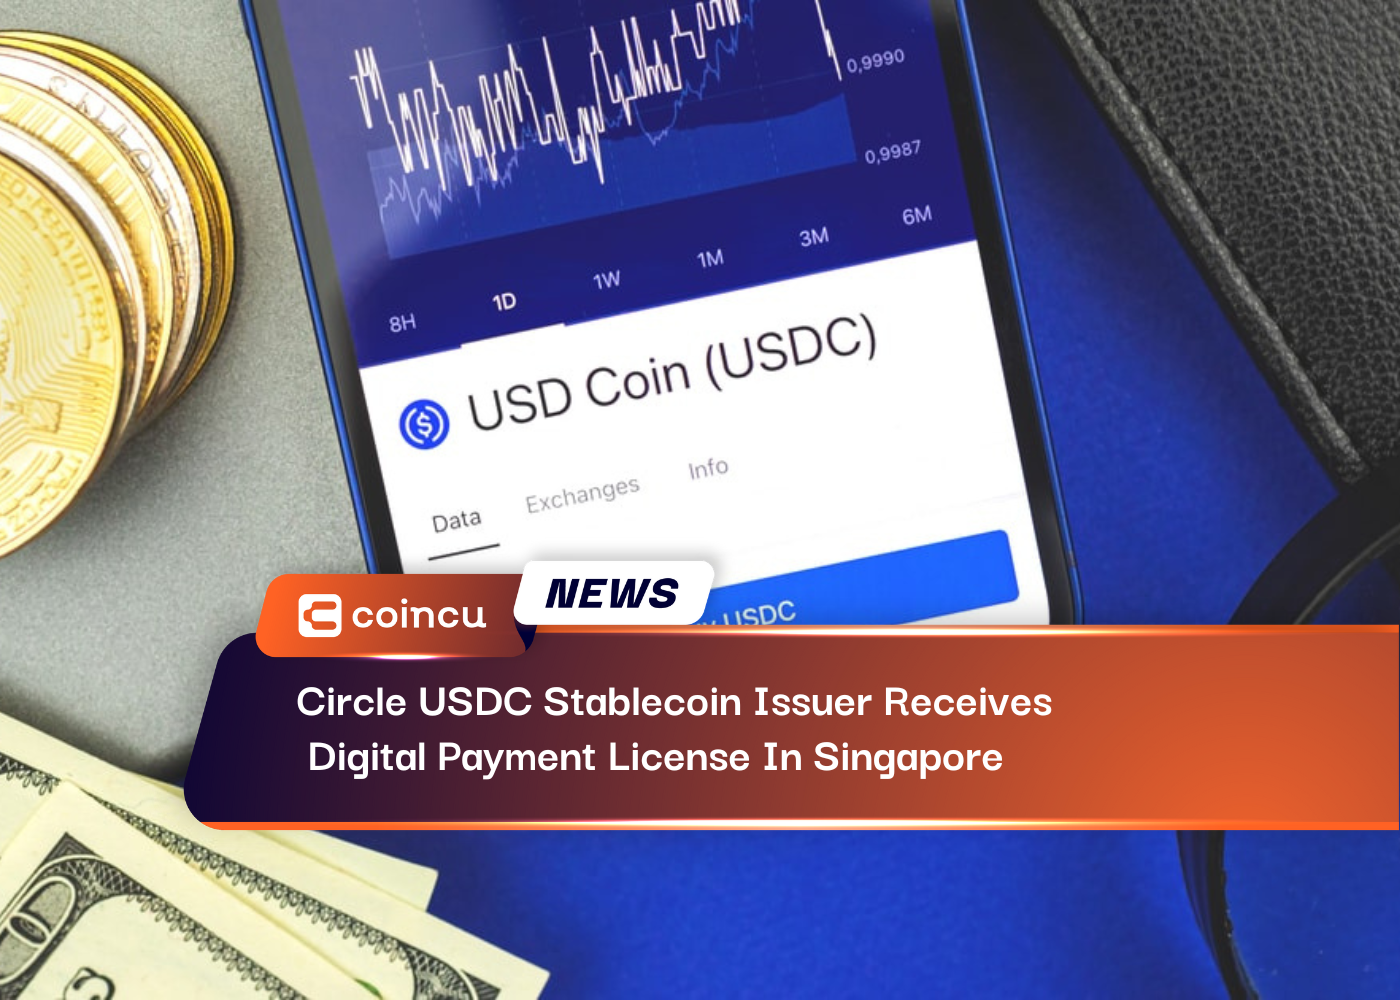 Circle USDC Stablecoin Issuer Receives 1